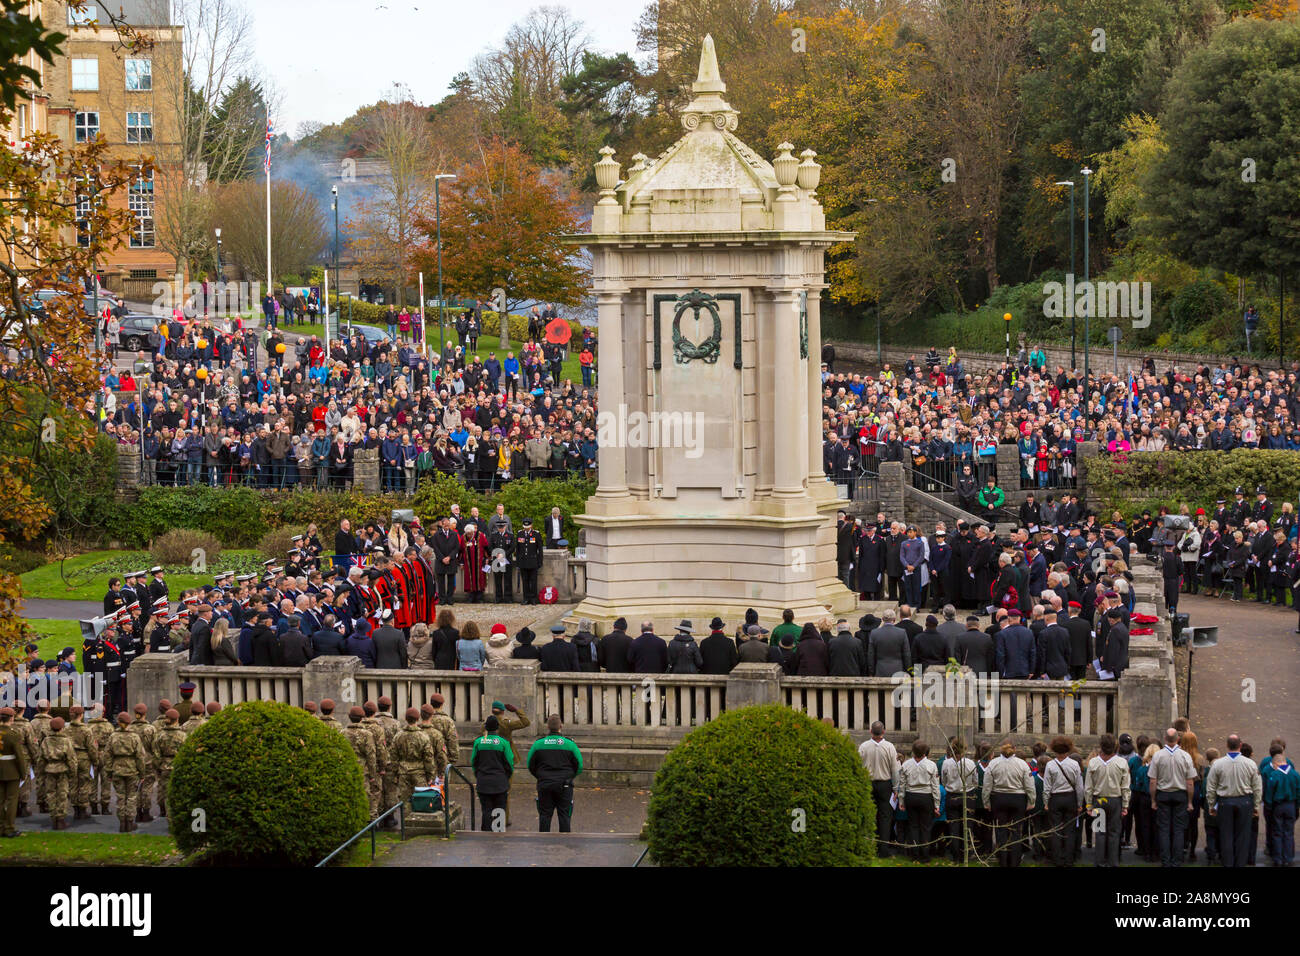 Bournemouth, Dorset UK. Sunday 10th November 2019. Remembrance Sunday Parade and wreath laying - representatives of armed services, forces groups and cadets parade through Bournemouth Town, followed by a service and wreath laying at the War Memorial in Central Gardens. Crowds gather to pay their respects and remember the fallen on a cold, but sunny day. Credit: Carolyn Jenkins/Alamy Live News Stock Photo